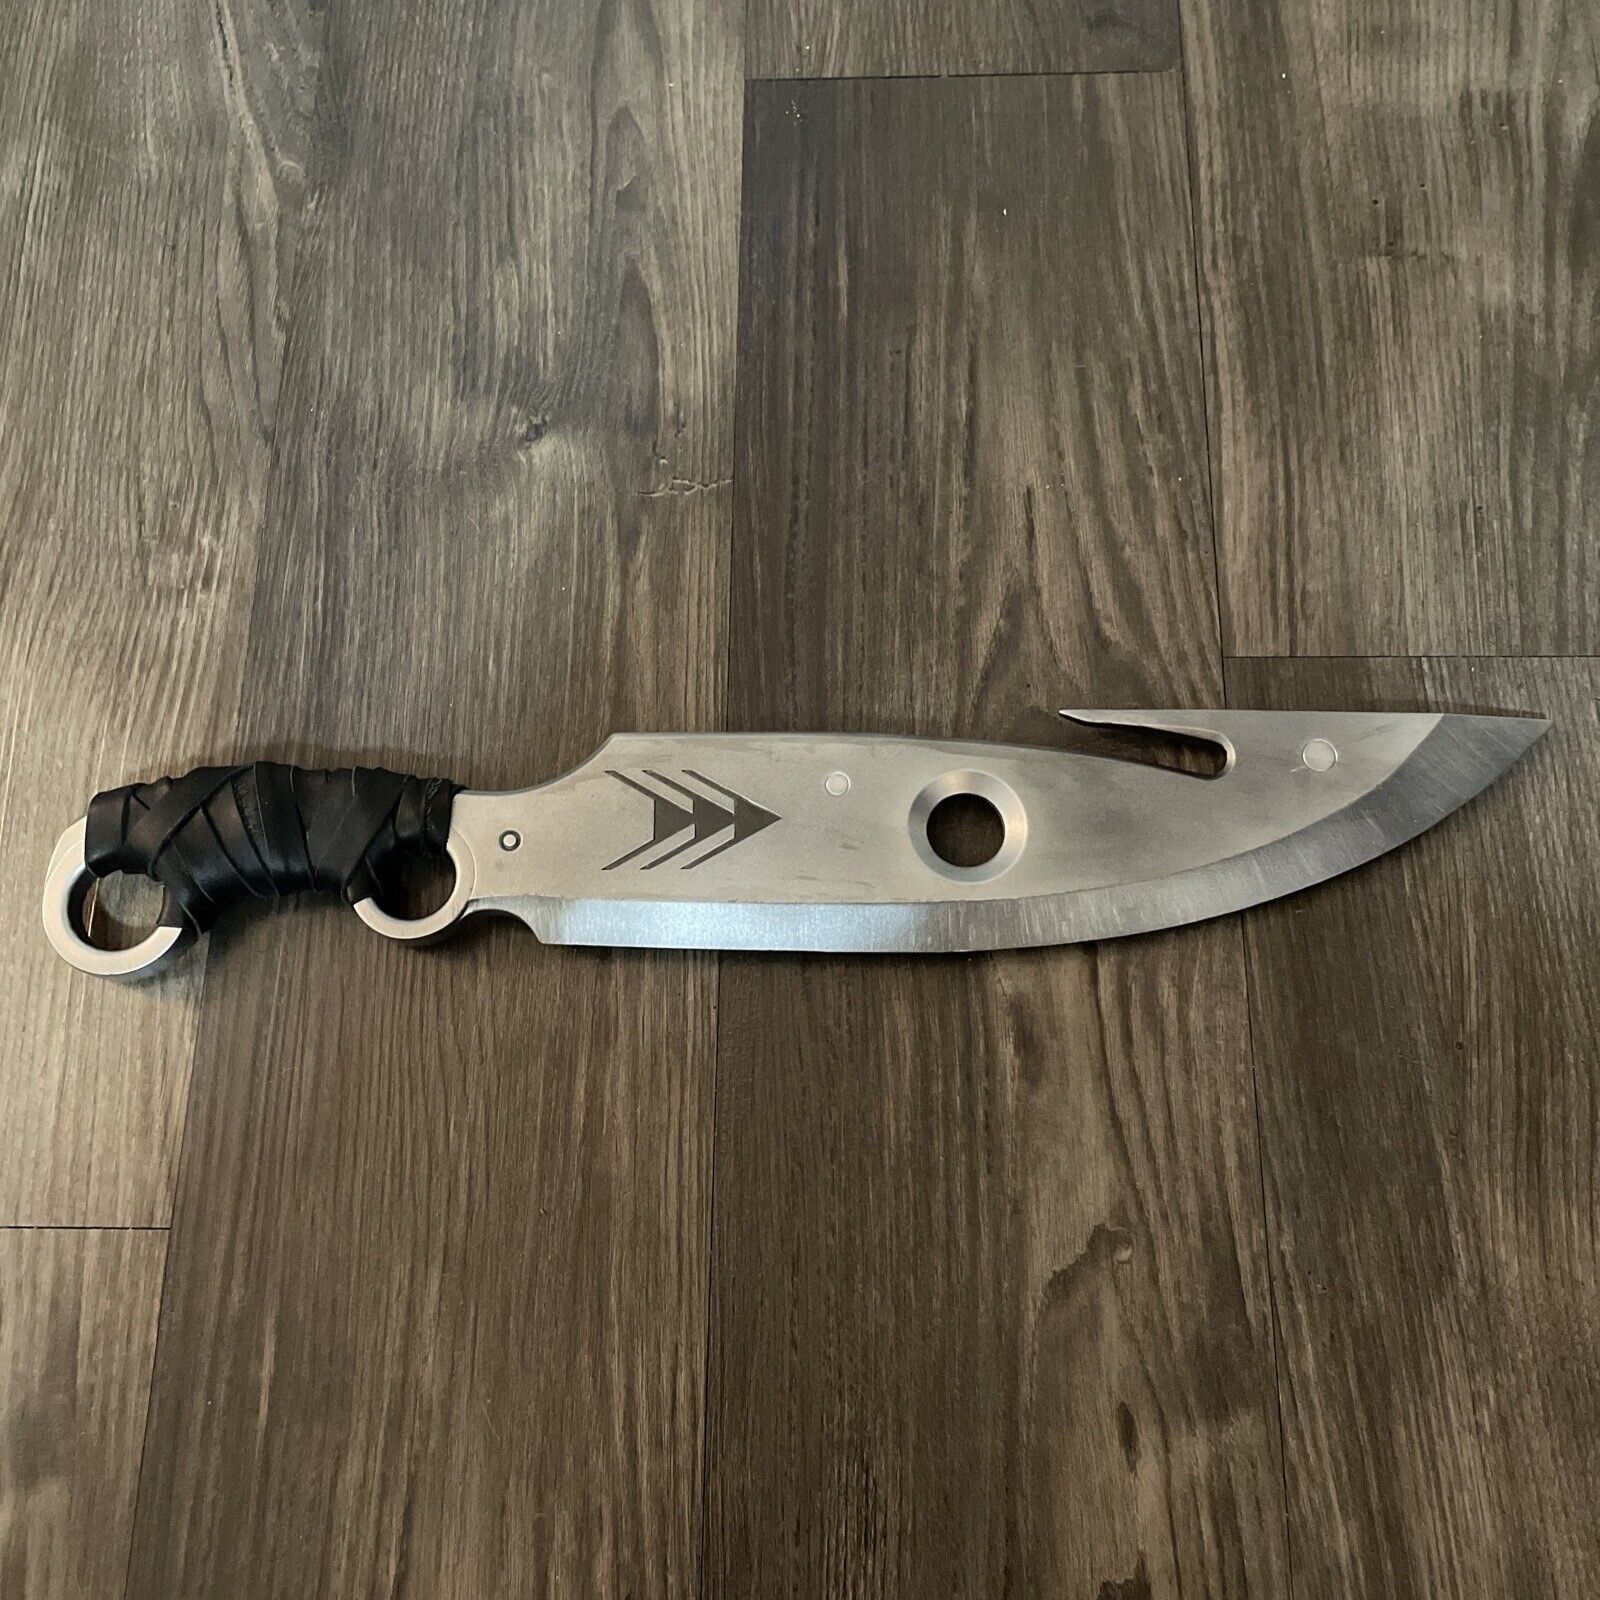 3D Printed Hunter Knife With Leather Handle By MetGuns